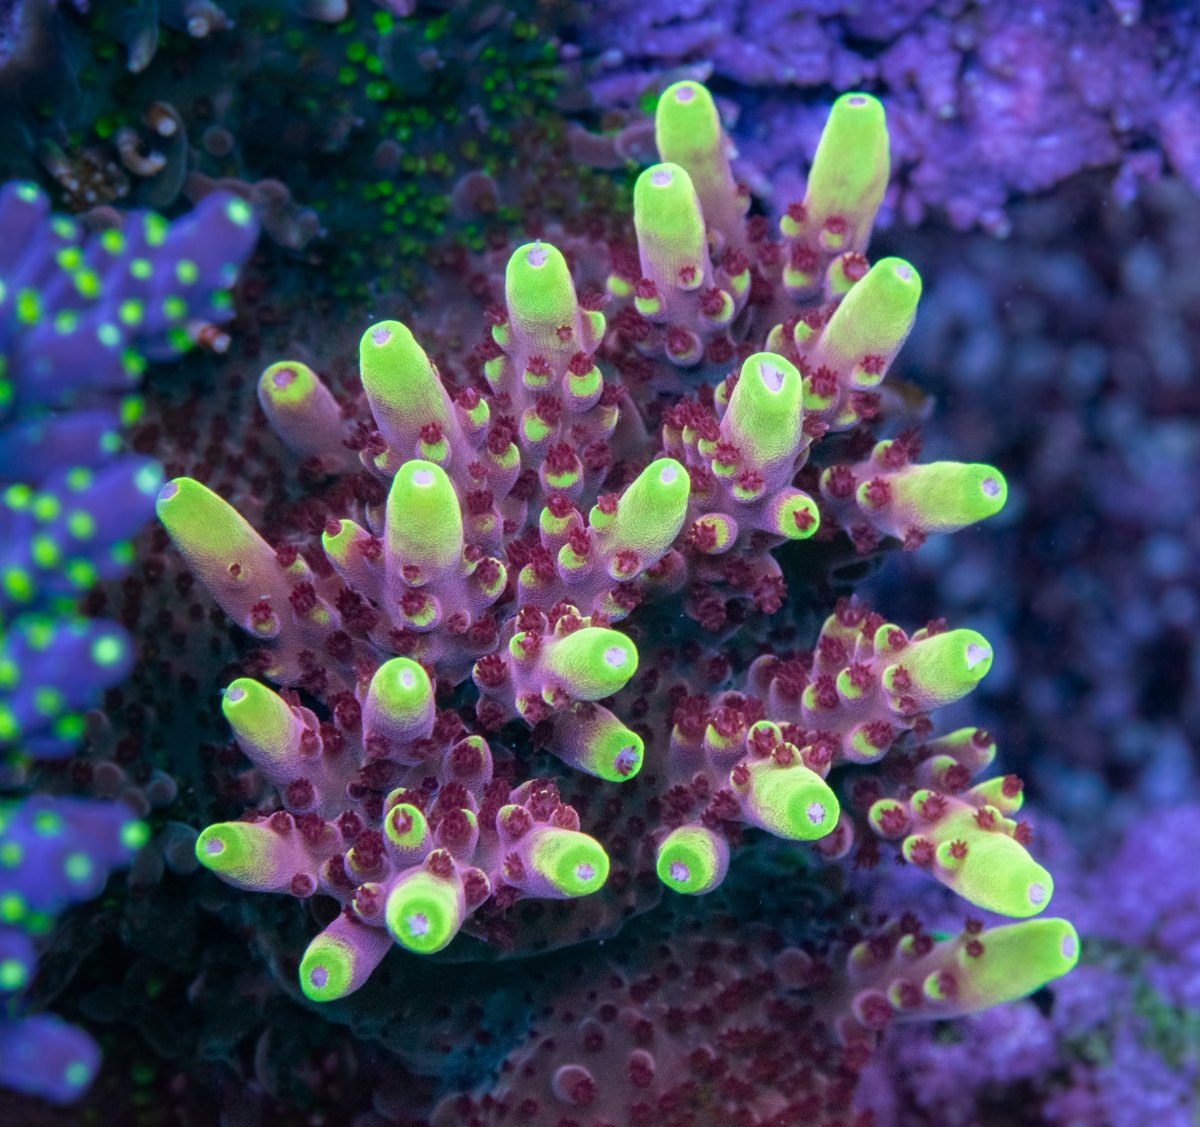 Jason fox flame and pink fold high or low light ? | REEF2REEF Saltwater ...